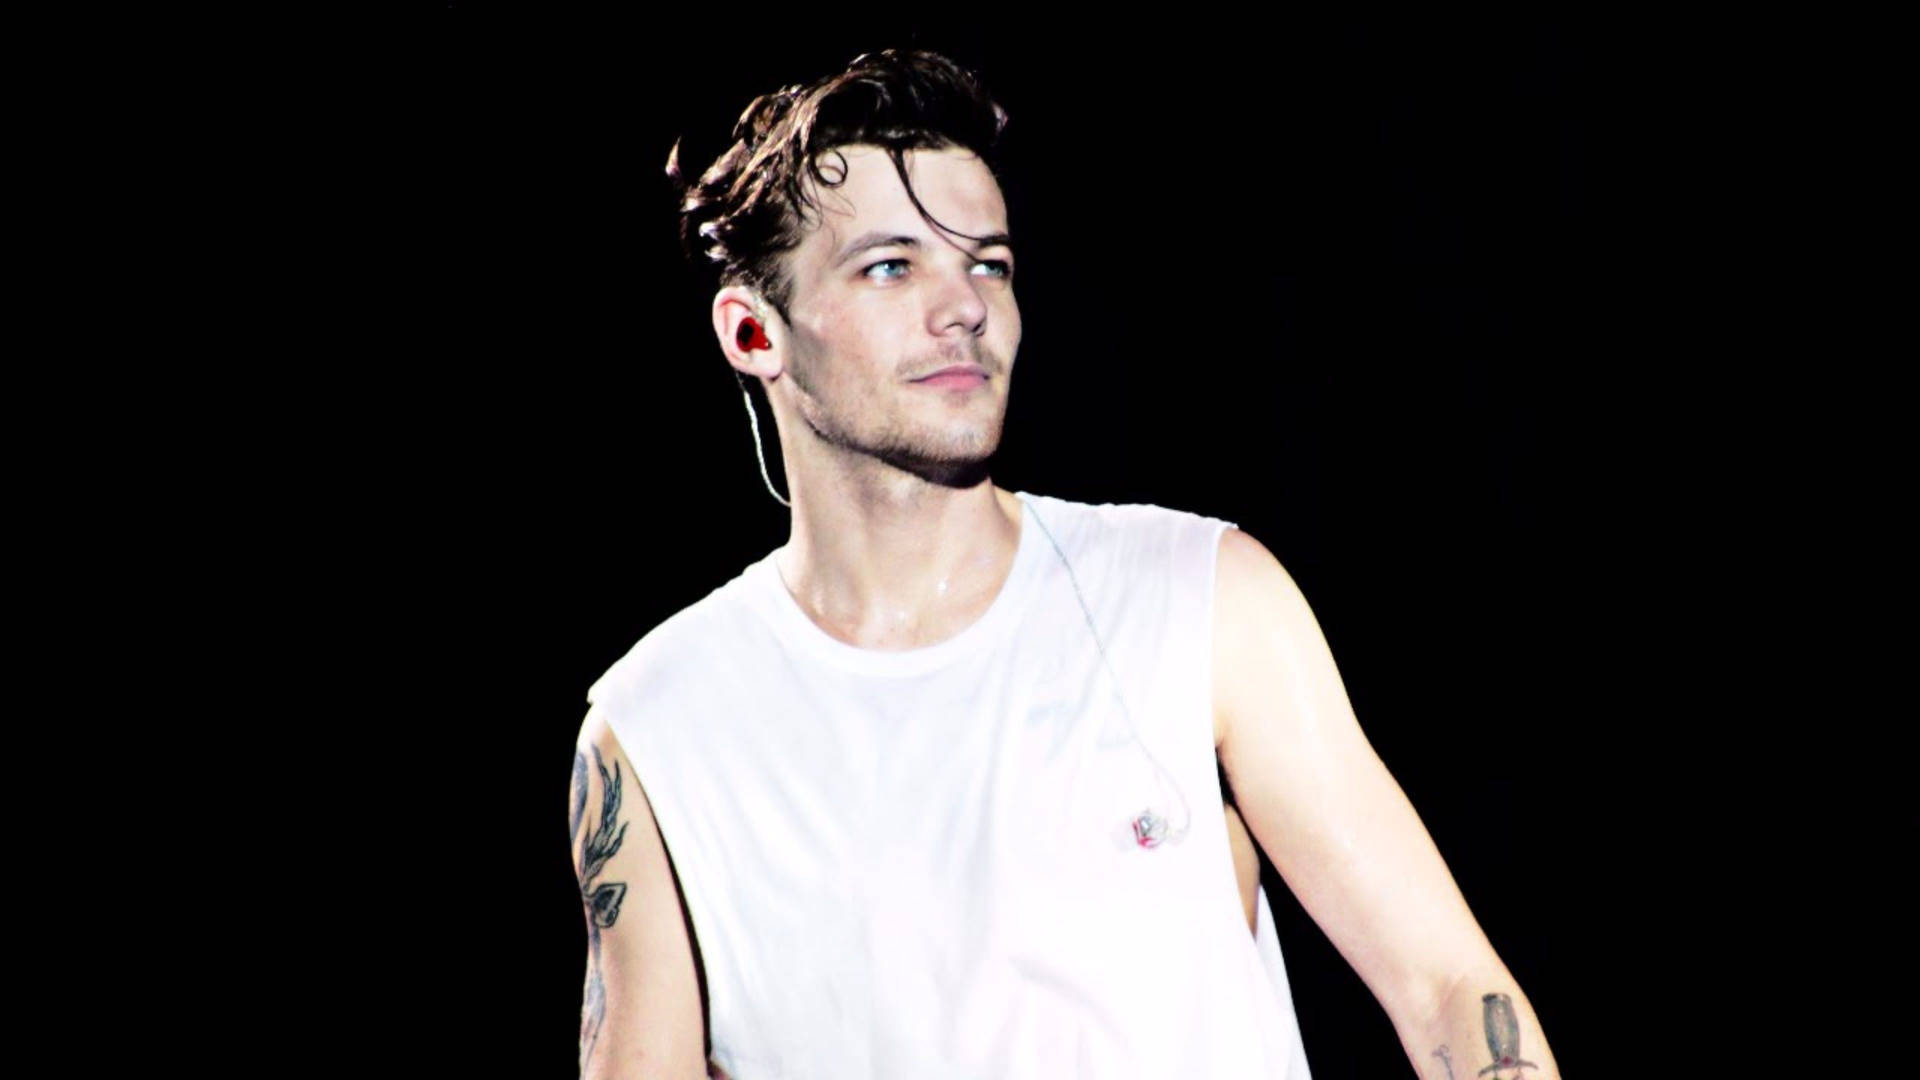 Louis Tomlinson In A Sleeveless Shirt Background